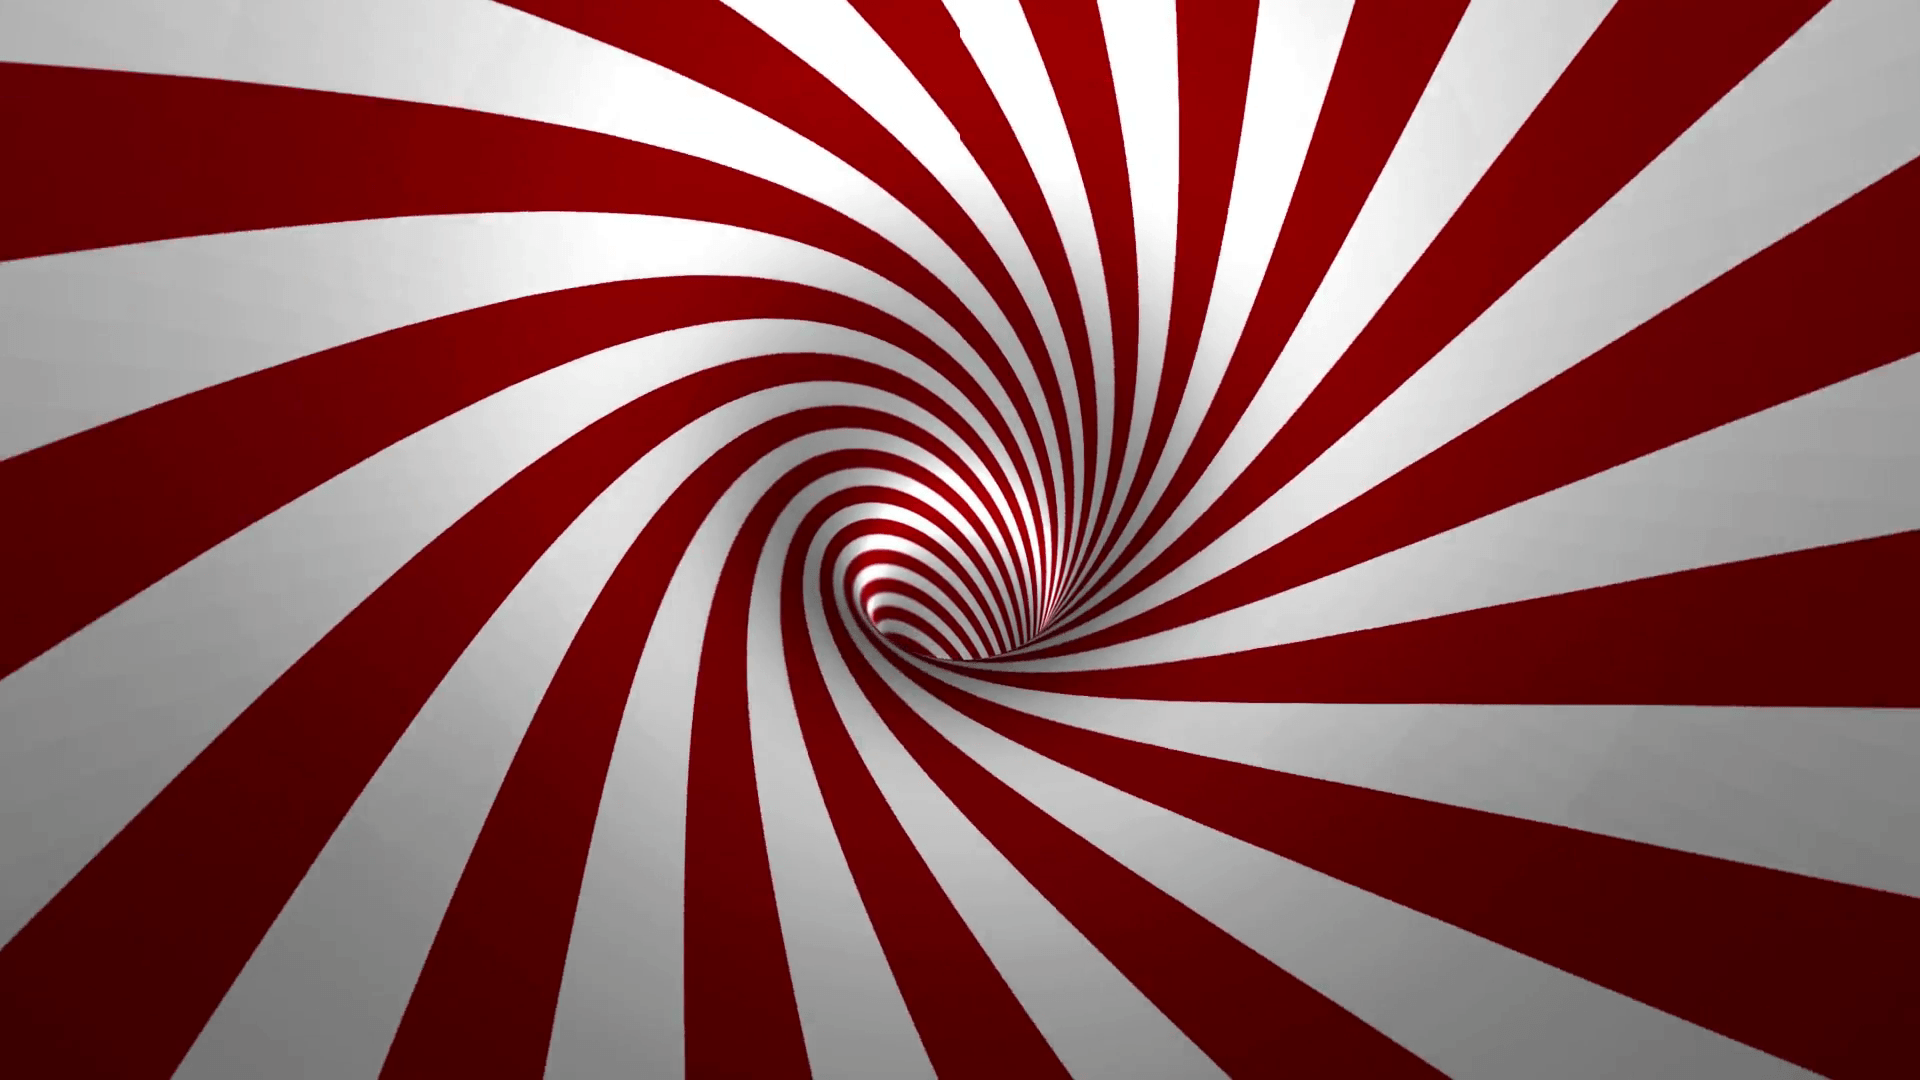 Hypnotic spiral, red and white background in 3D Motion Background